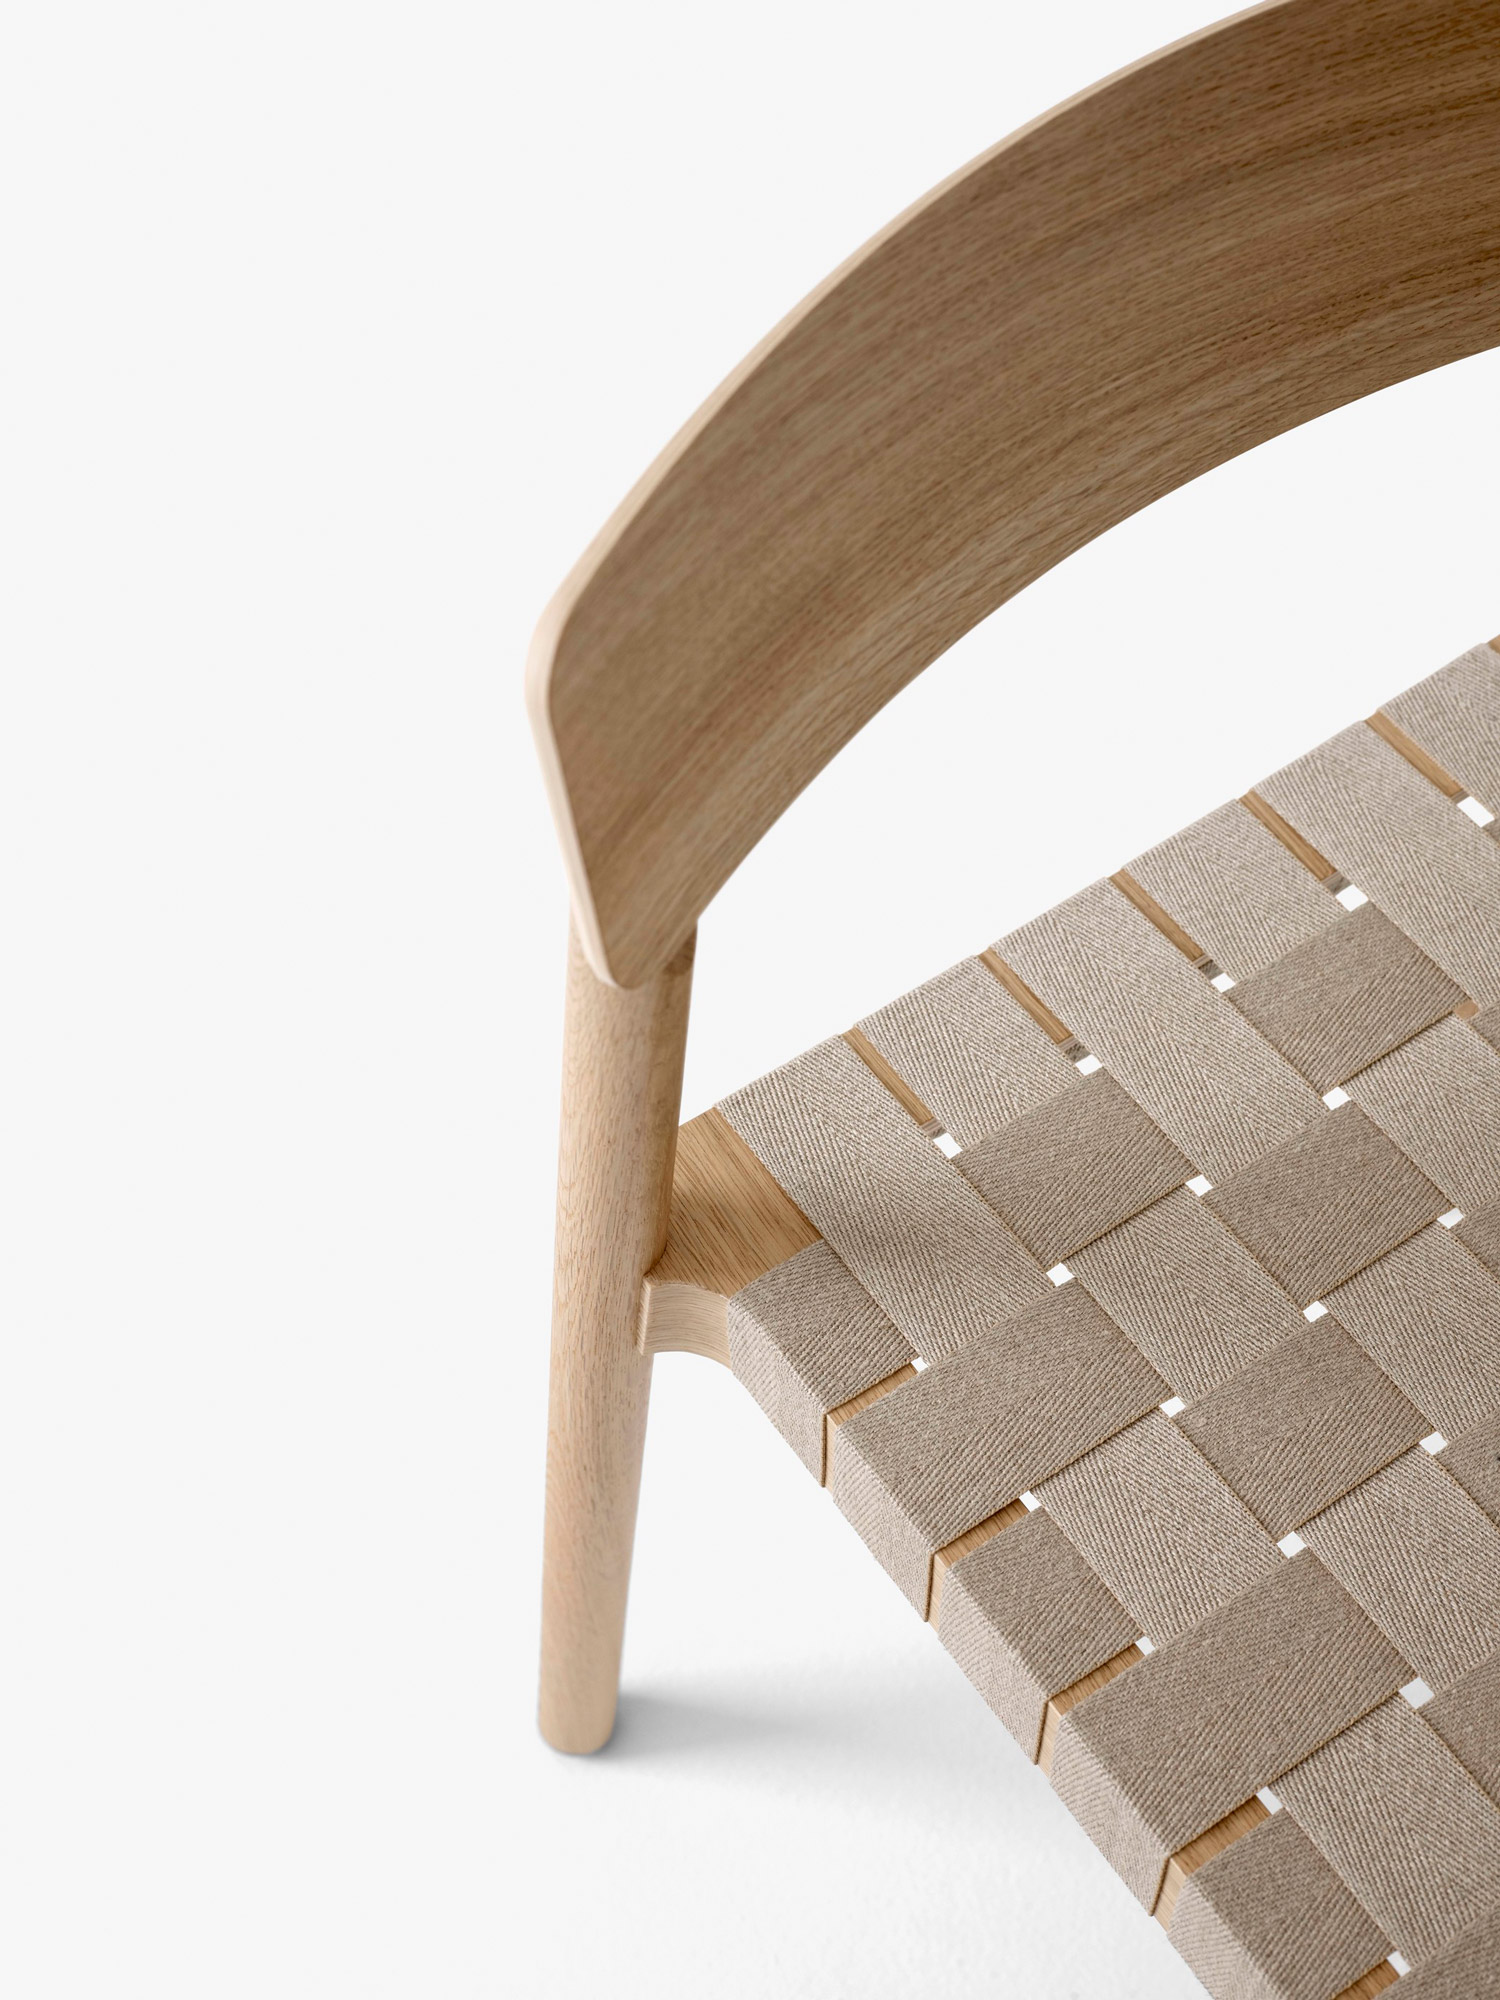 Detail shot of Oak Betty Chair with a seat made of exposed webbing by Thau & Kallio | Aesence